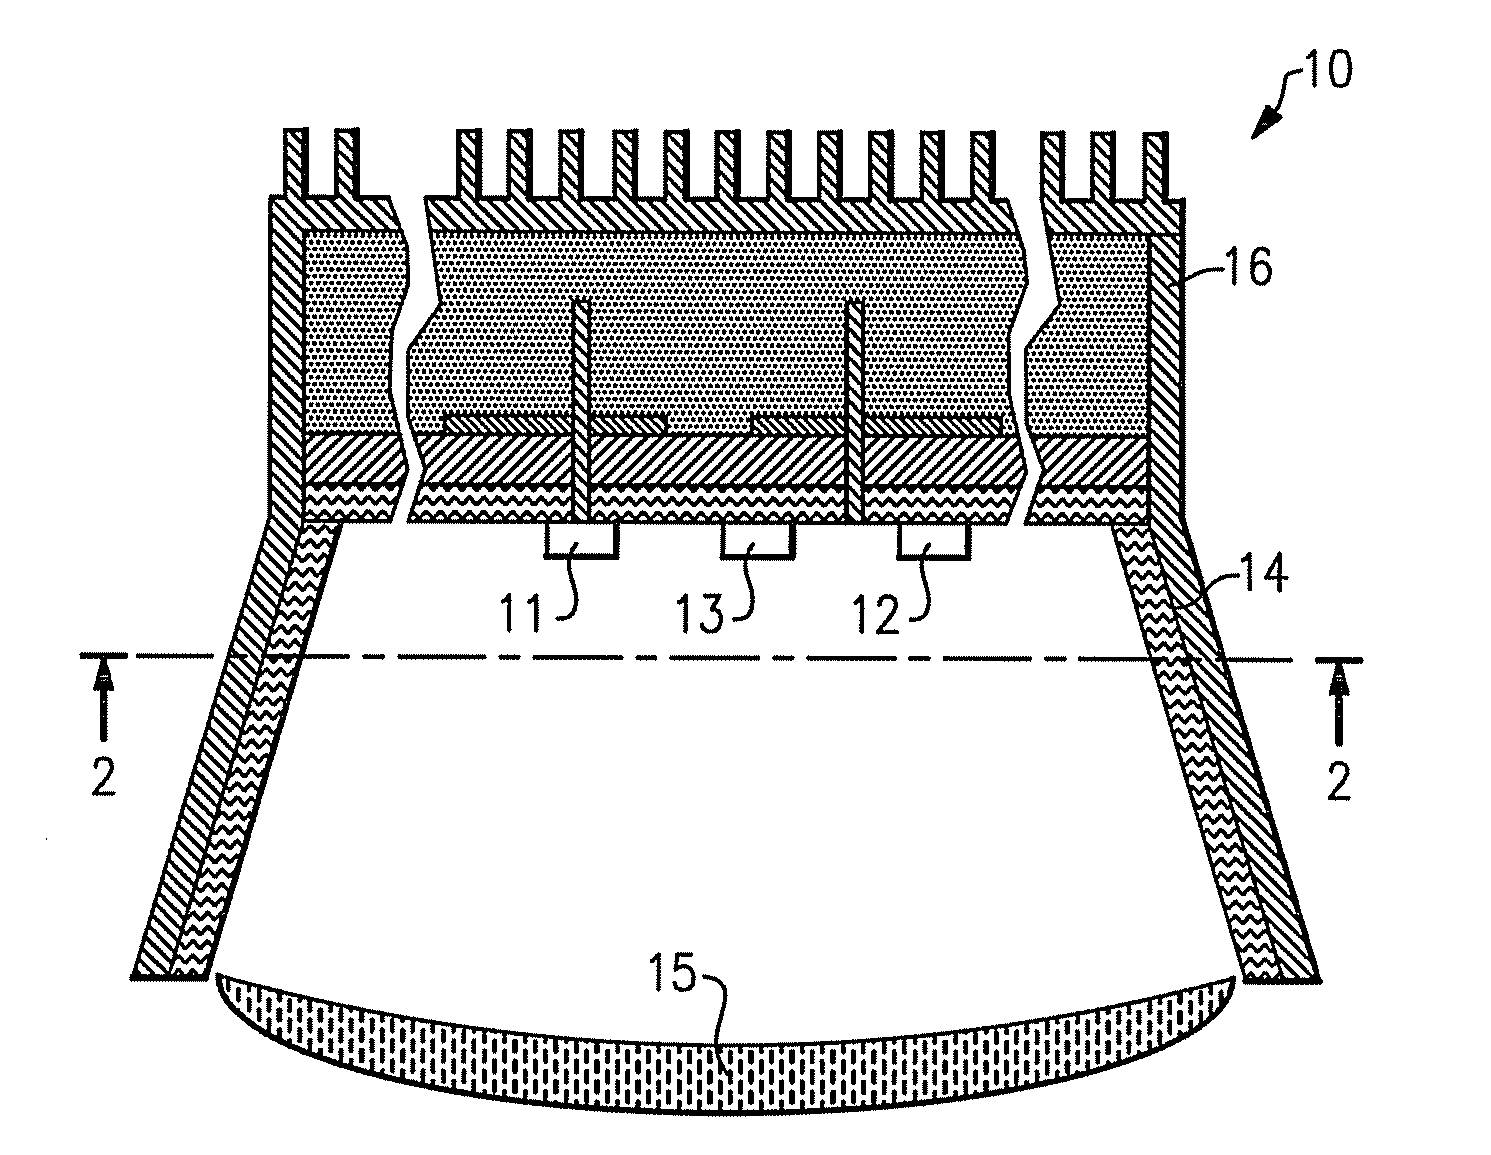 Lighting device having first, second and third groups of solid state light emitters, and lighting arrangement